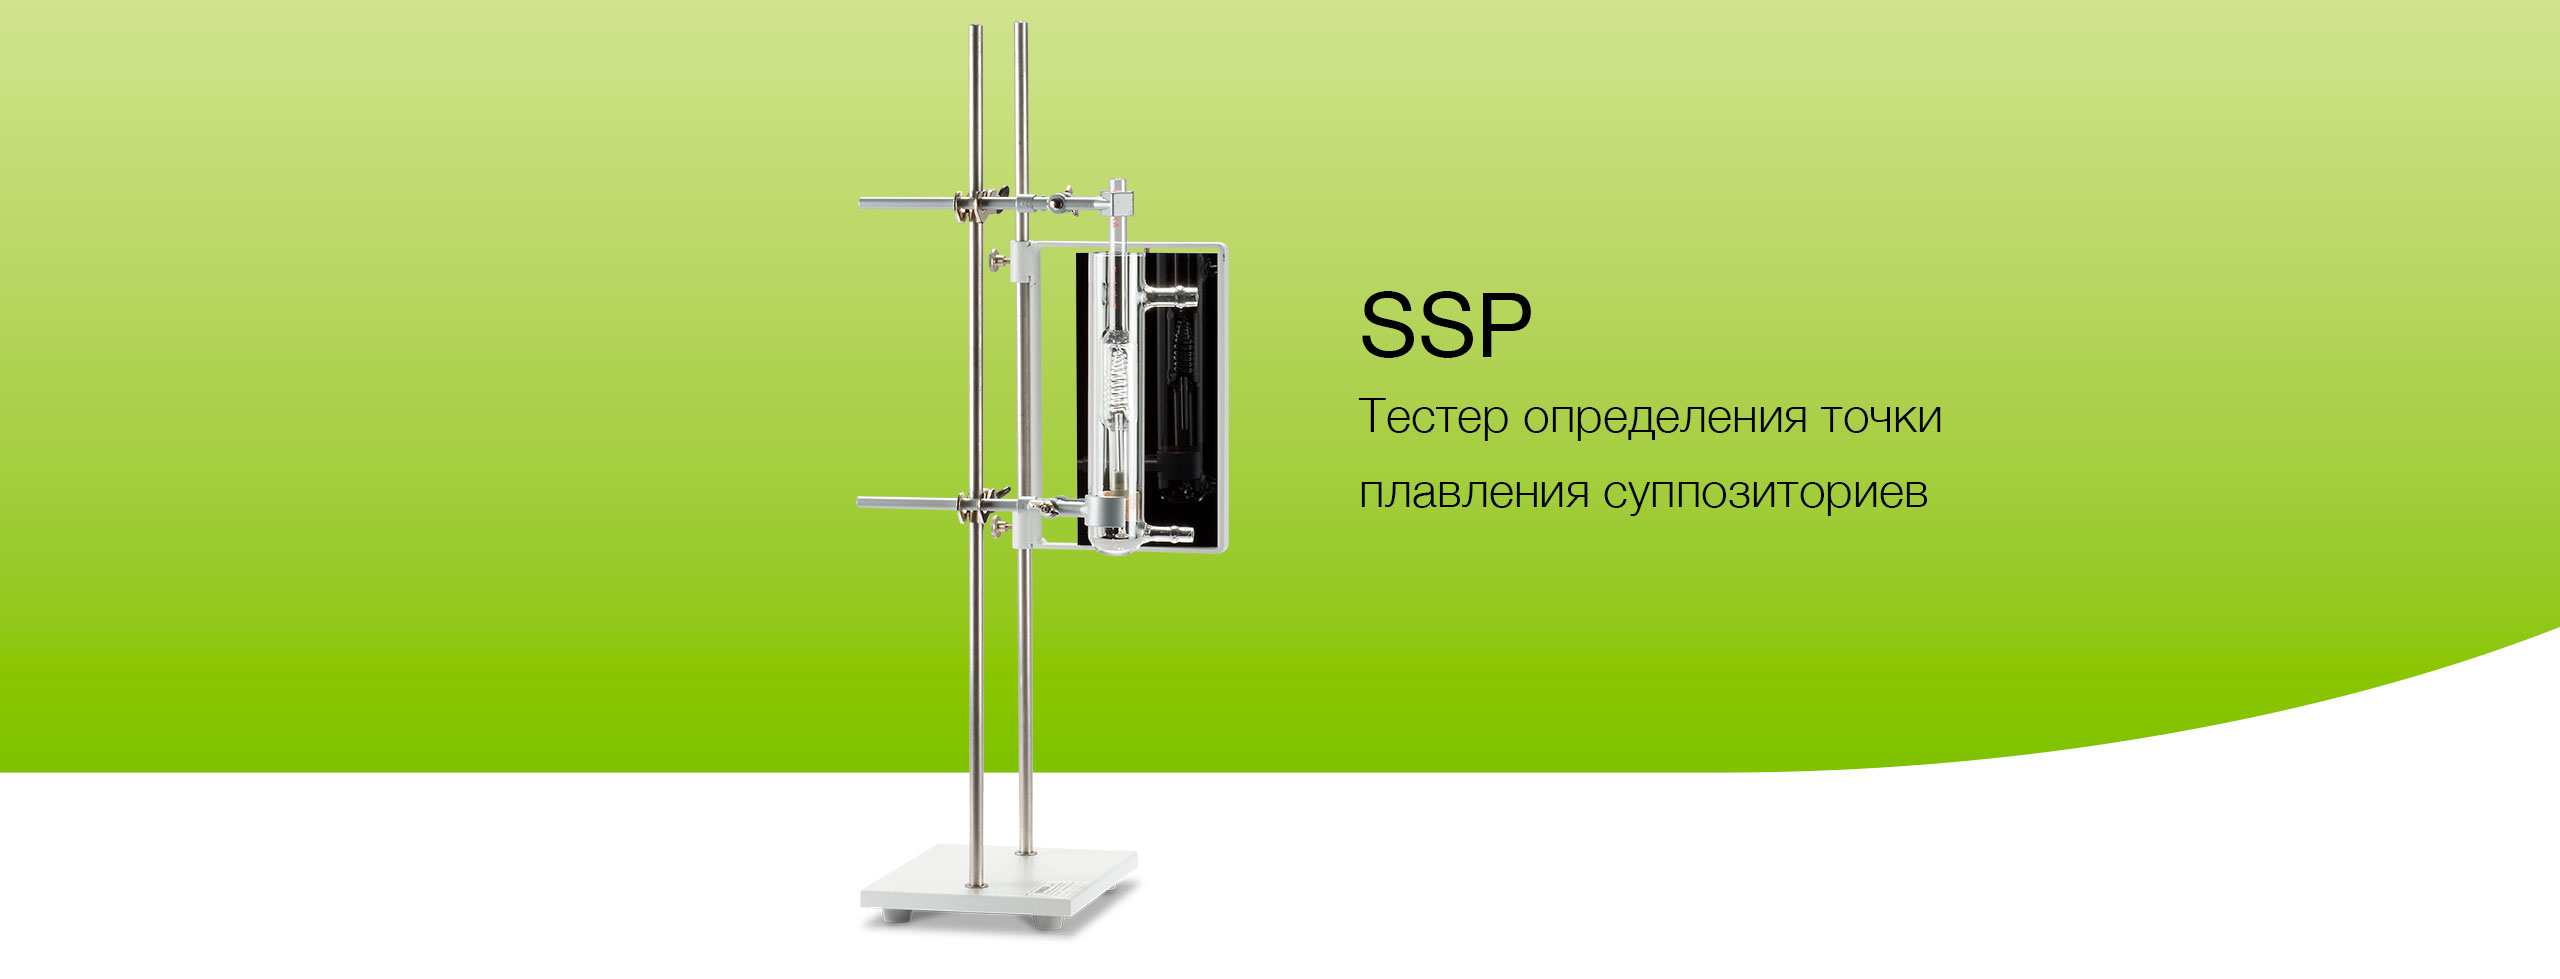 SSP Product Page